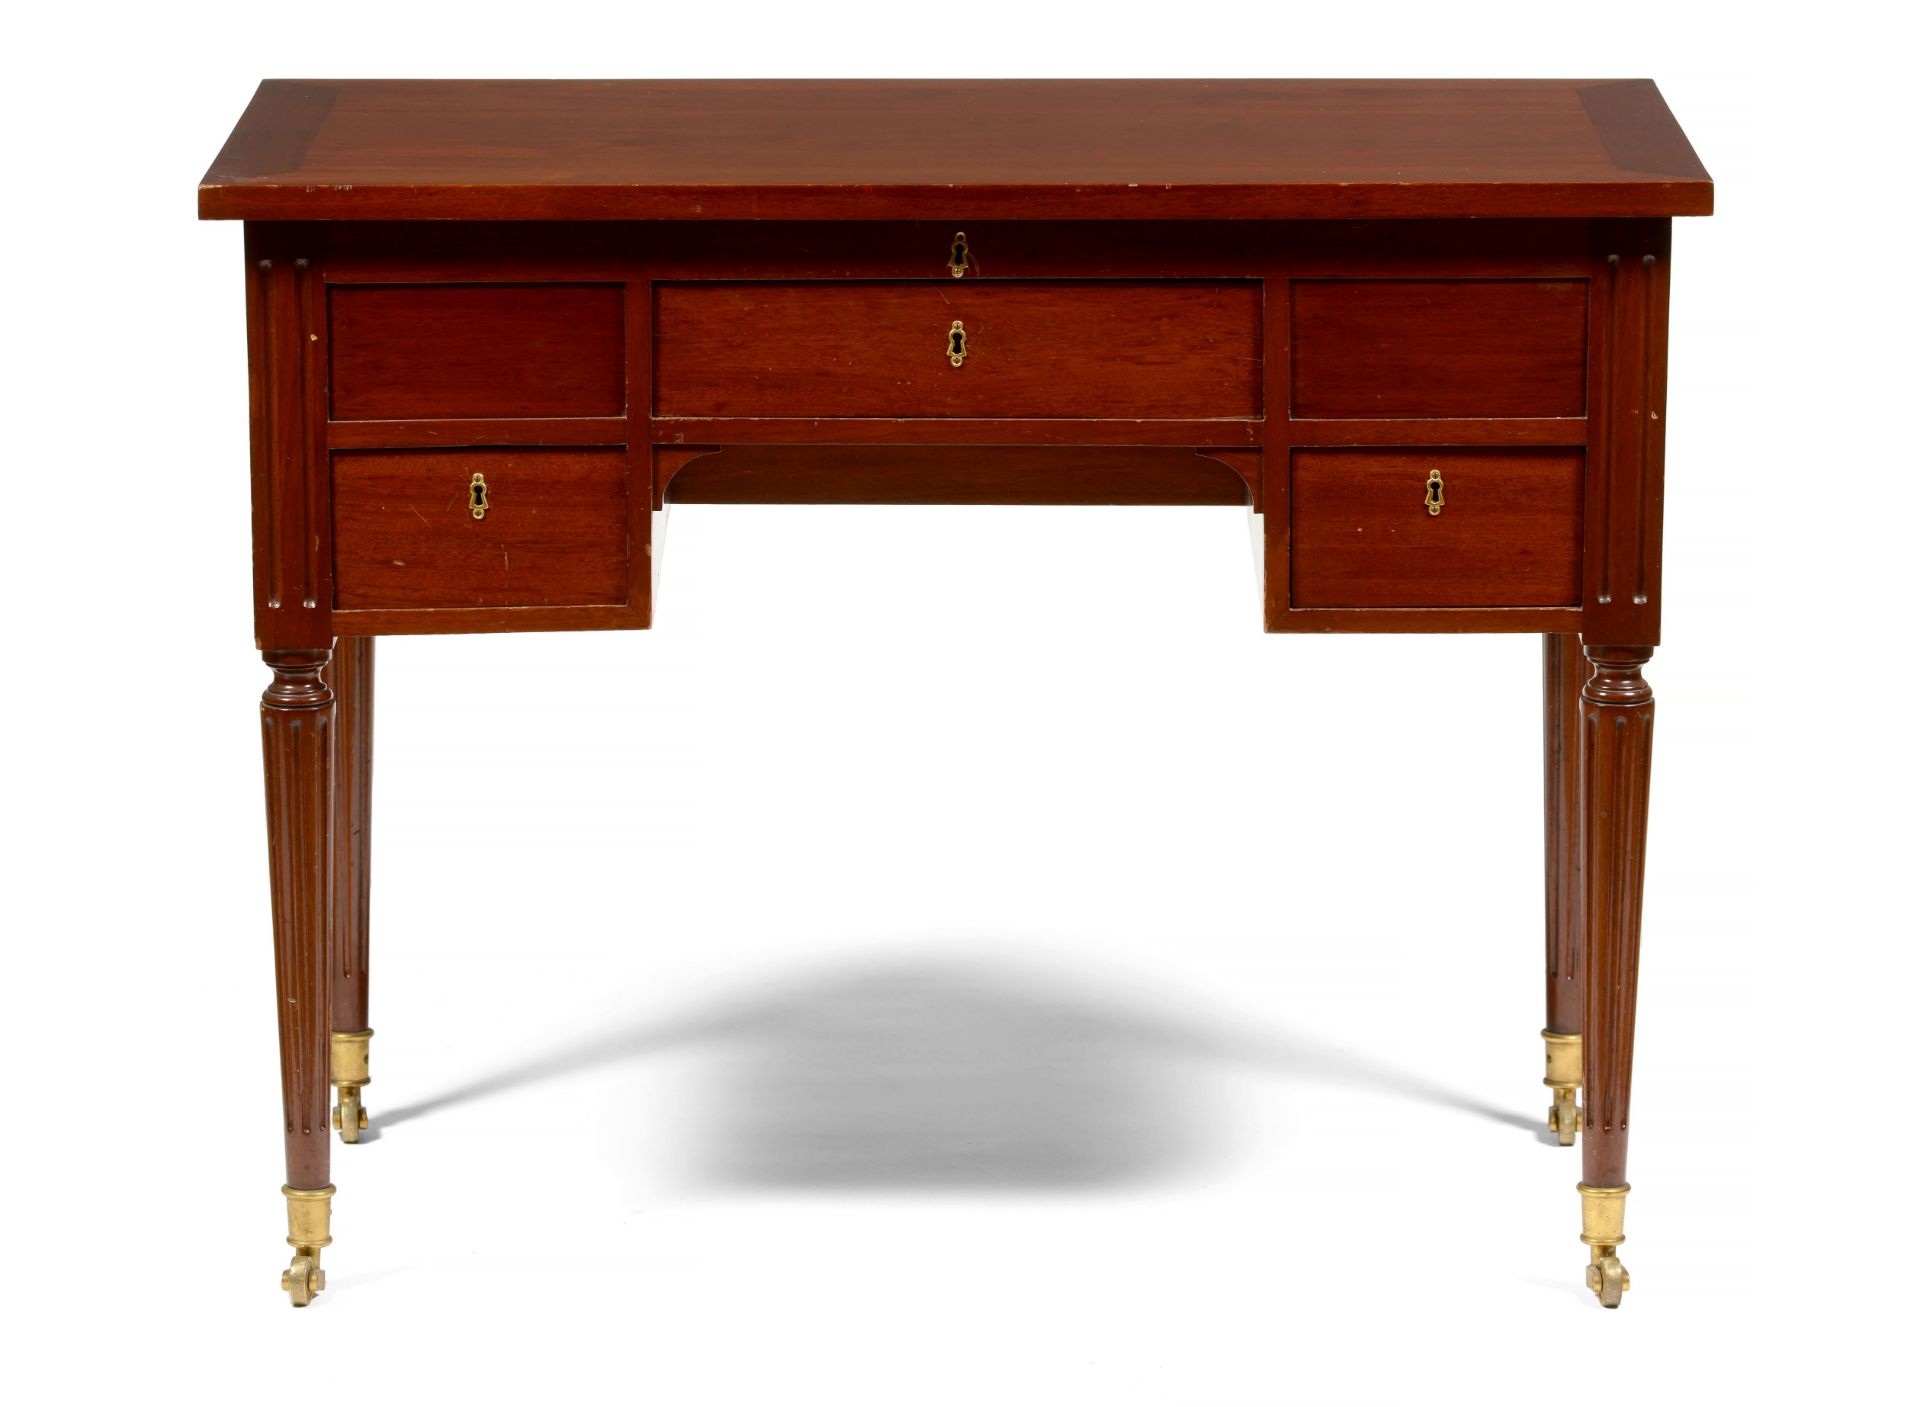 An Empire dressing table